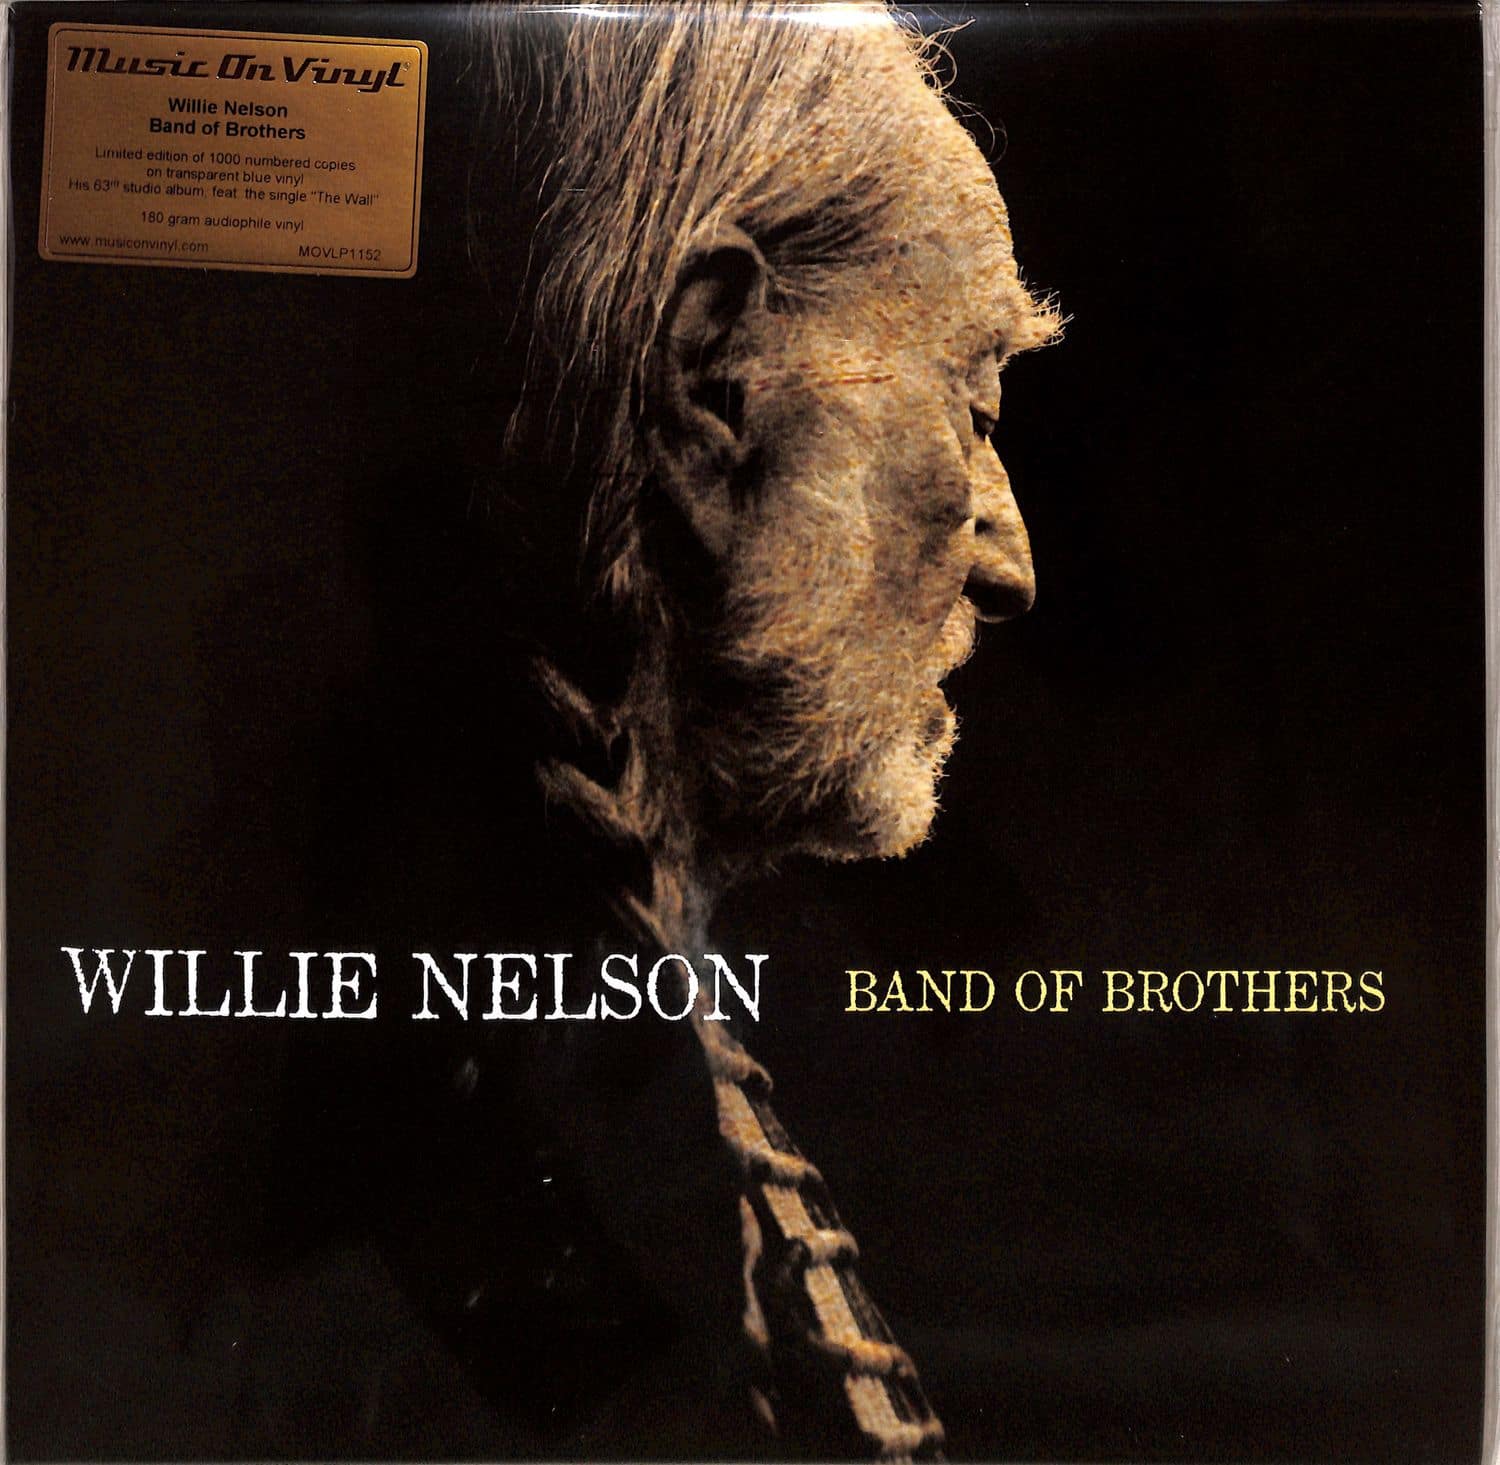 Willie Nelson - BAND OF BROTHERS 